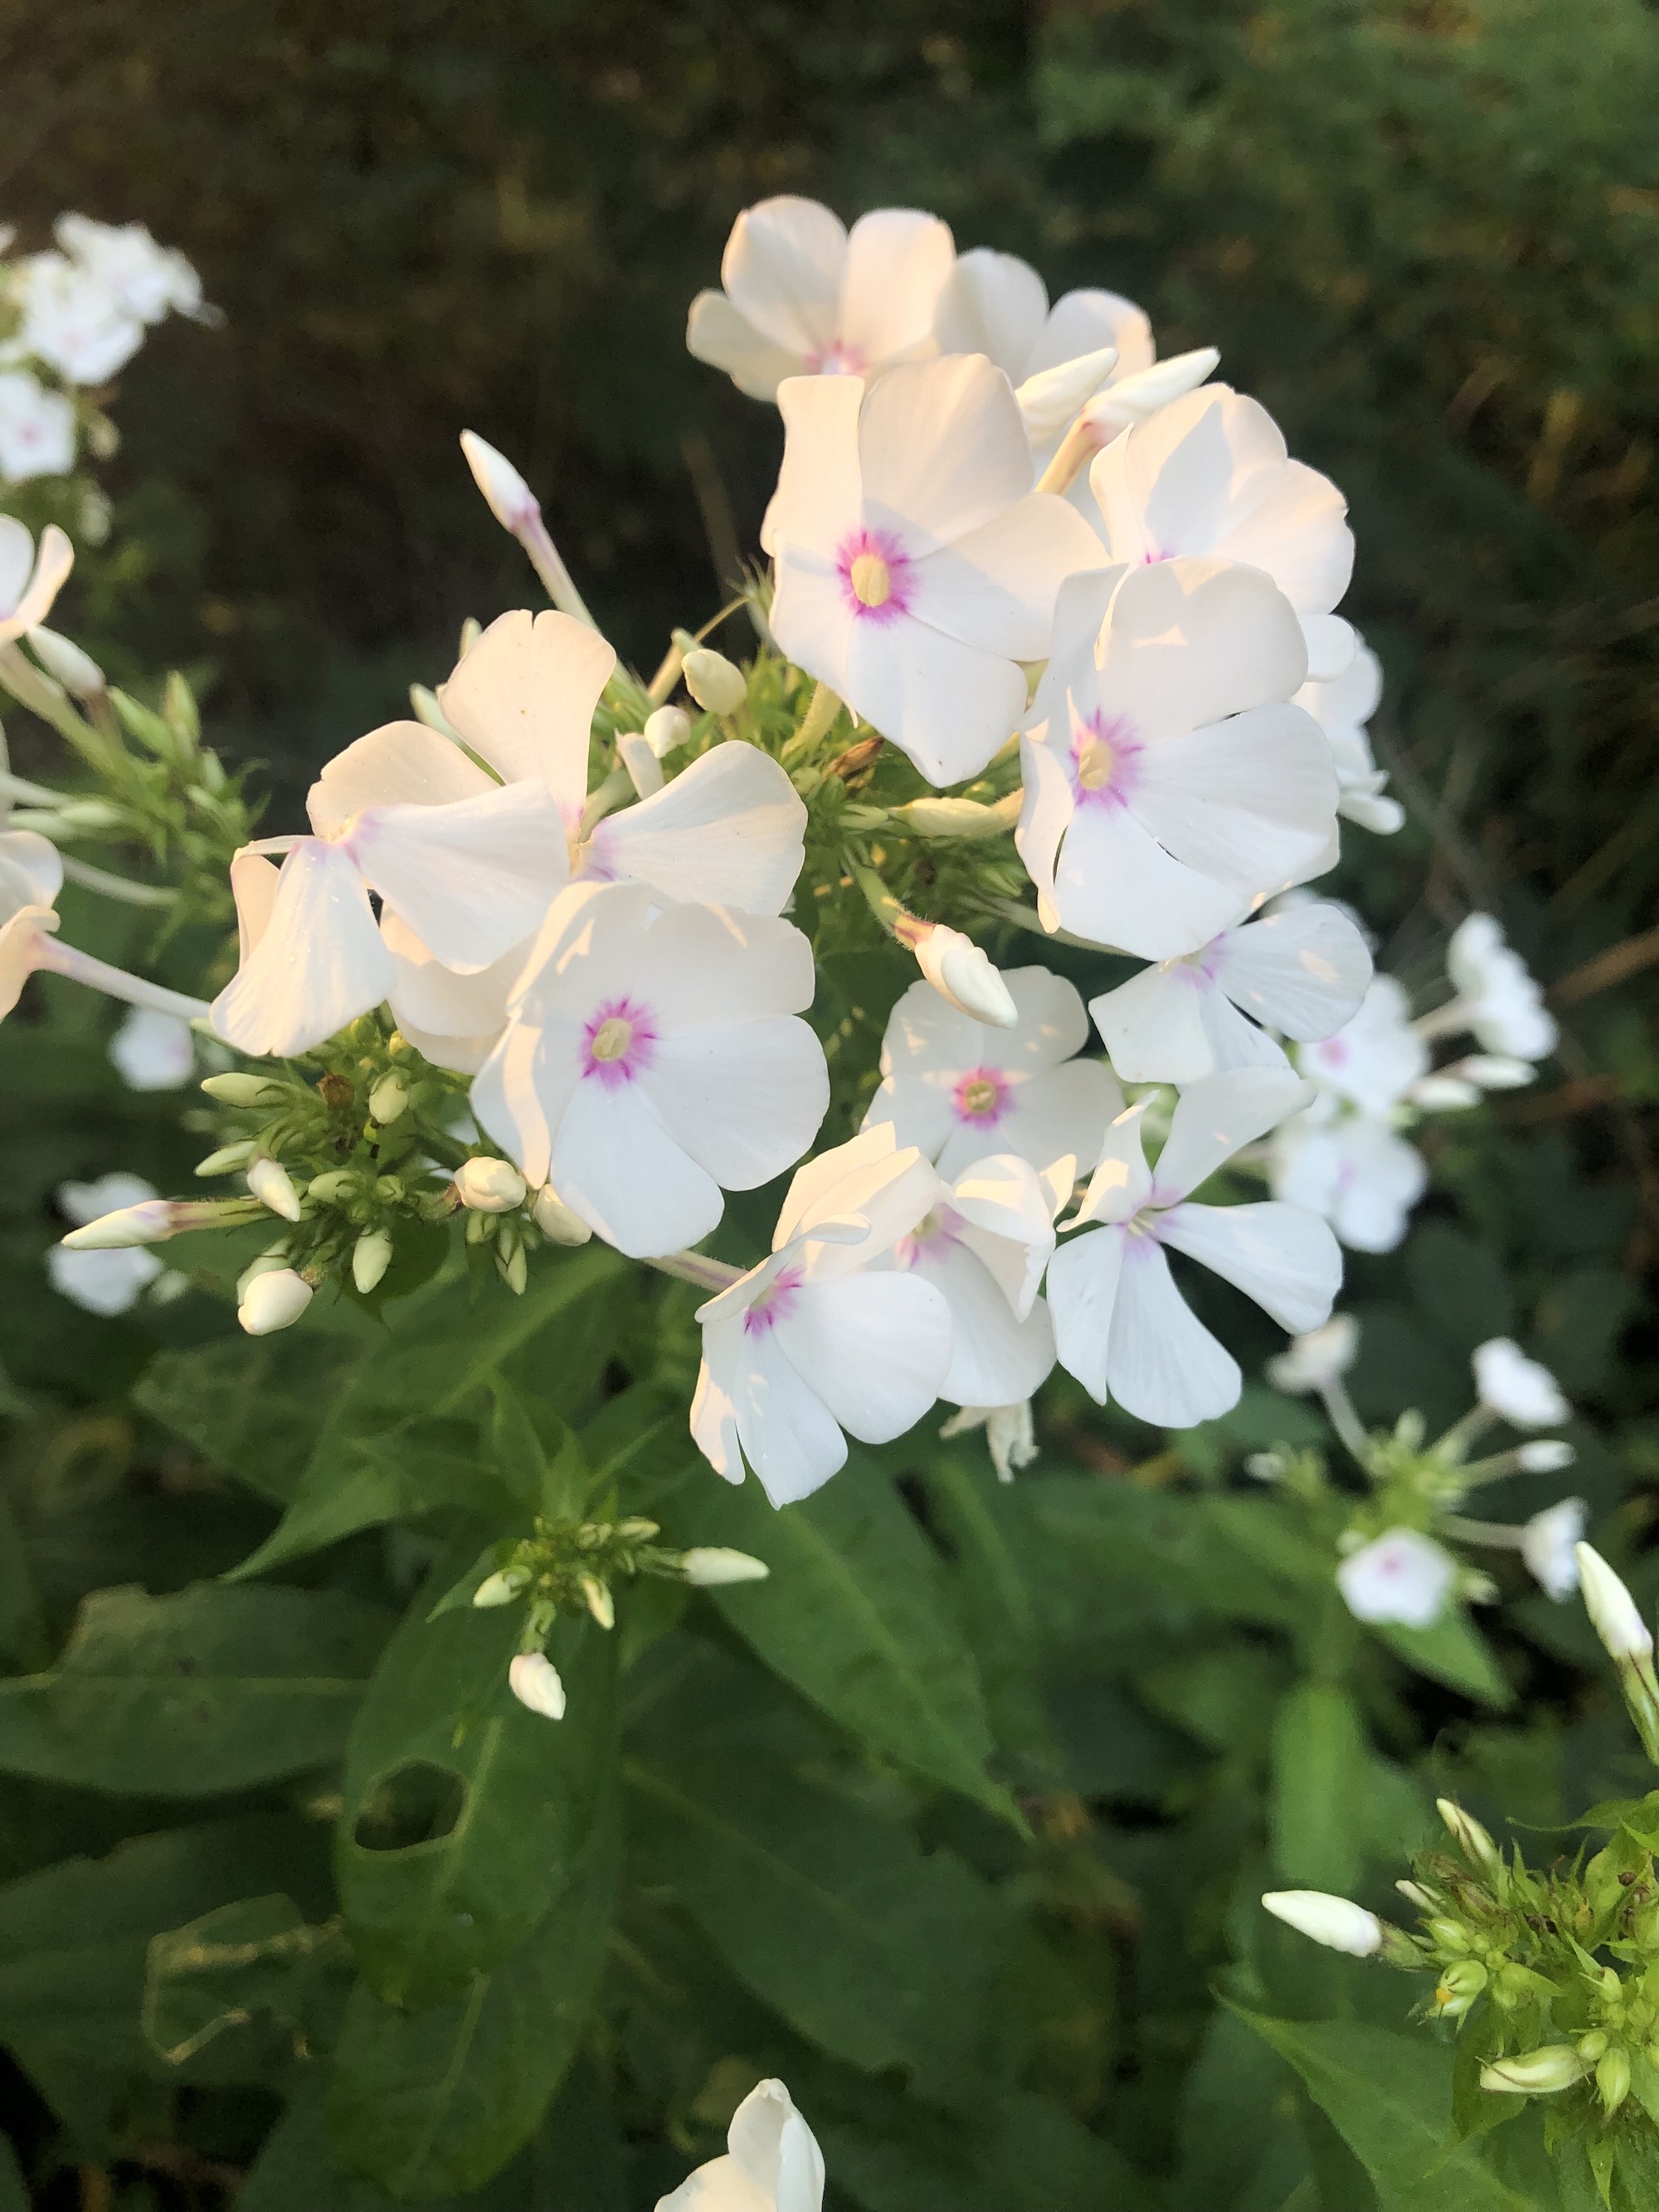 Tall Garden Phlox by Duck Pond on July 31, 201.